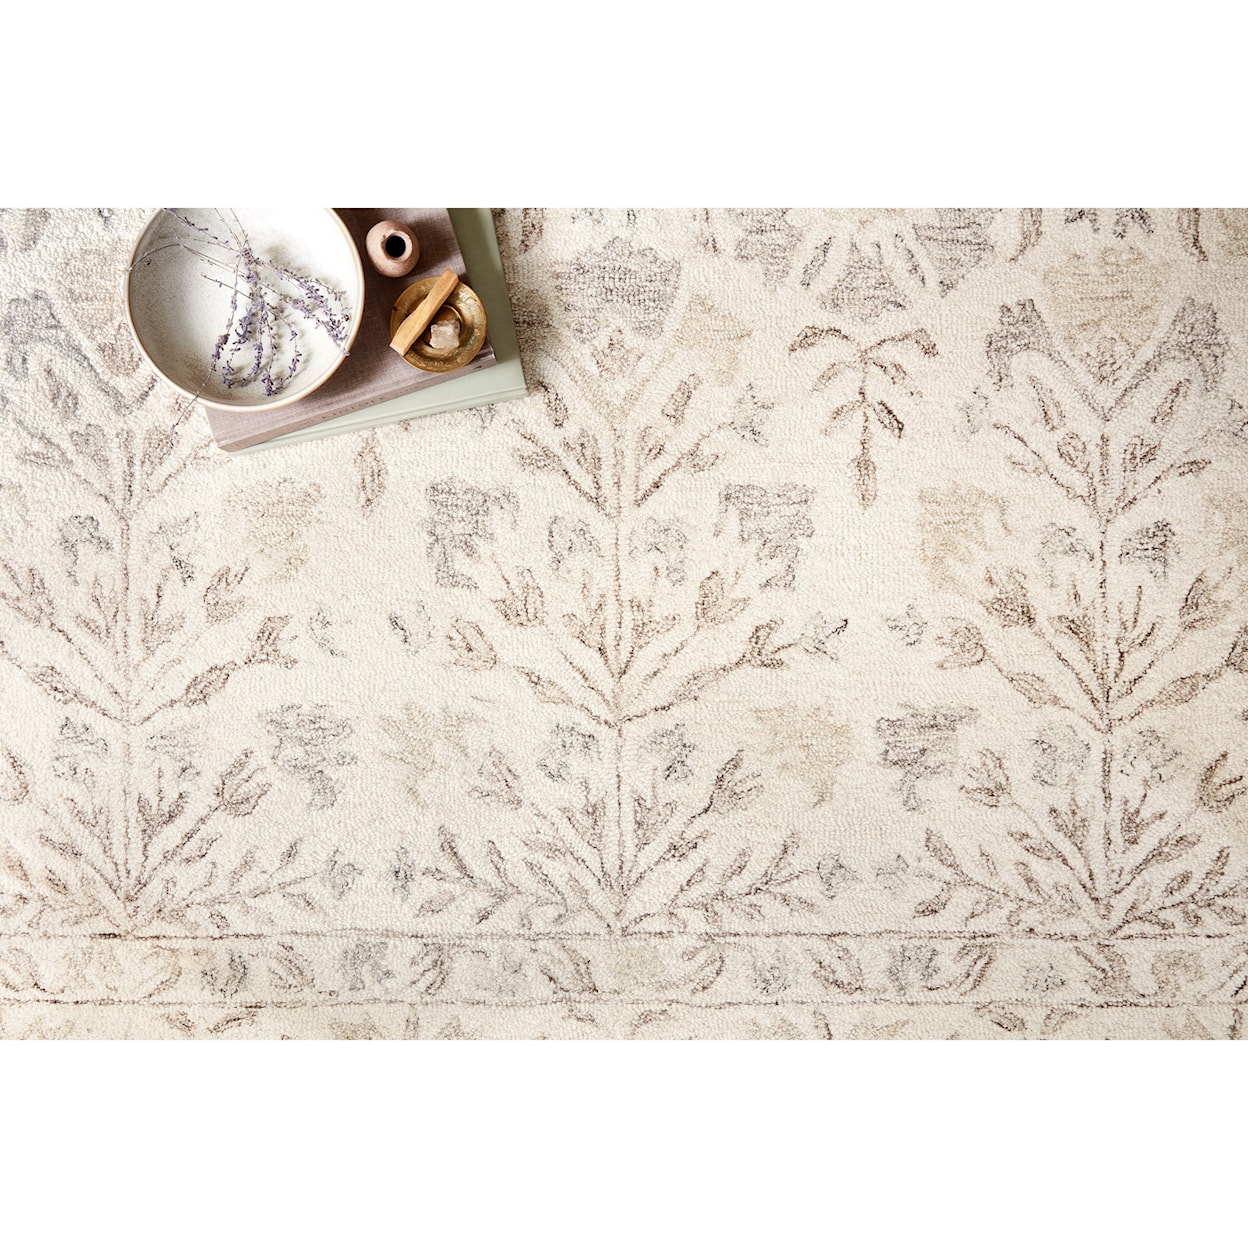 Loloi Rugs Norabel 2'6" x 9'9" Ivory / Neutral Rug